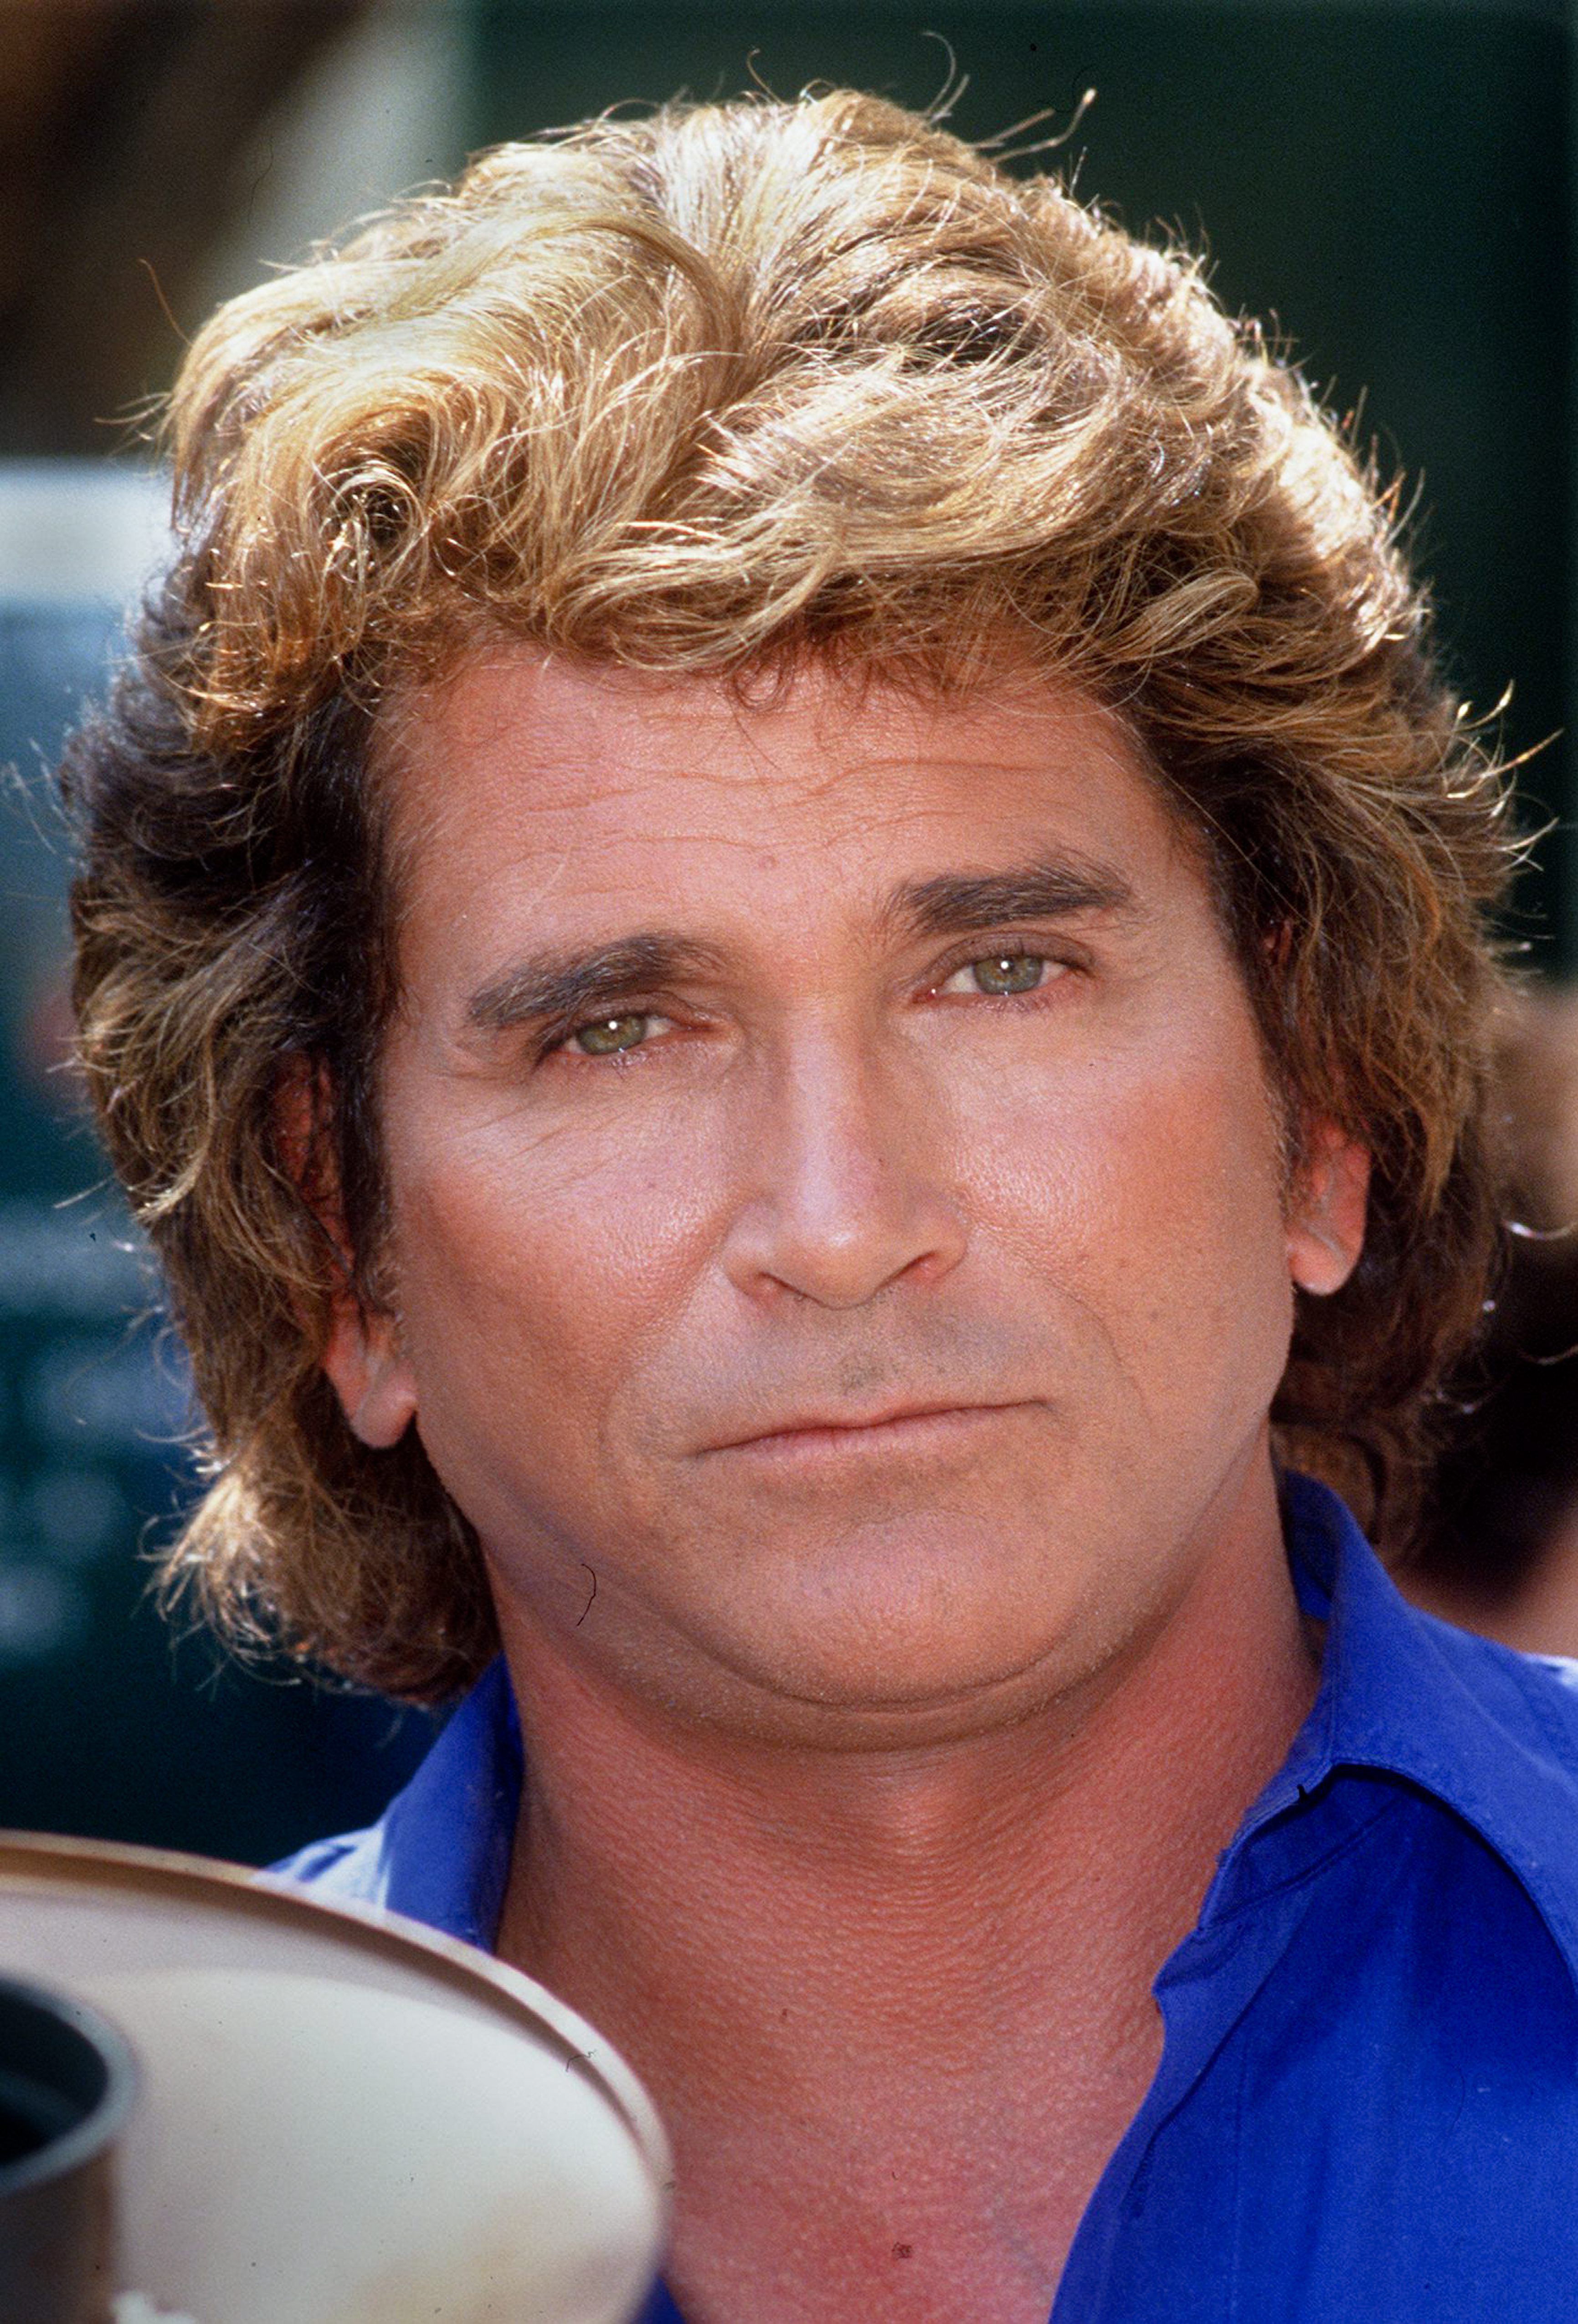 Michael Landon pictured on January 1, 1985 | Source: Getty Images